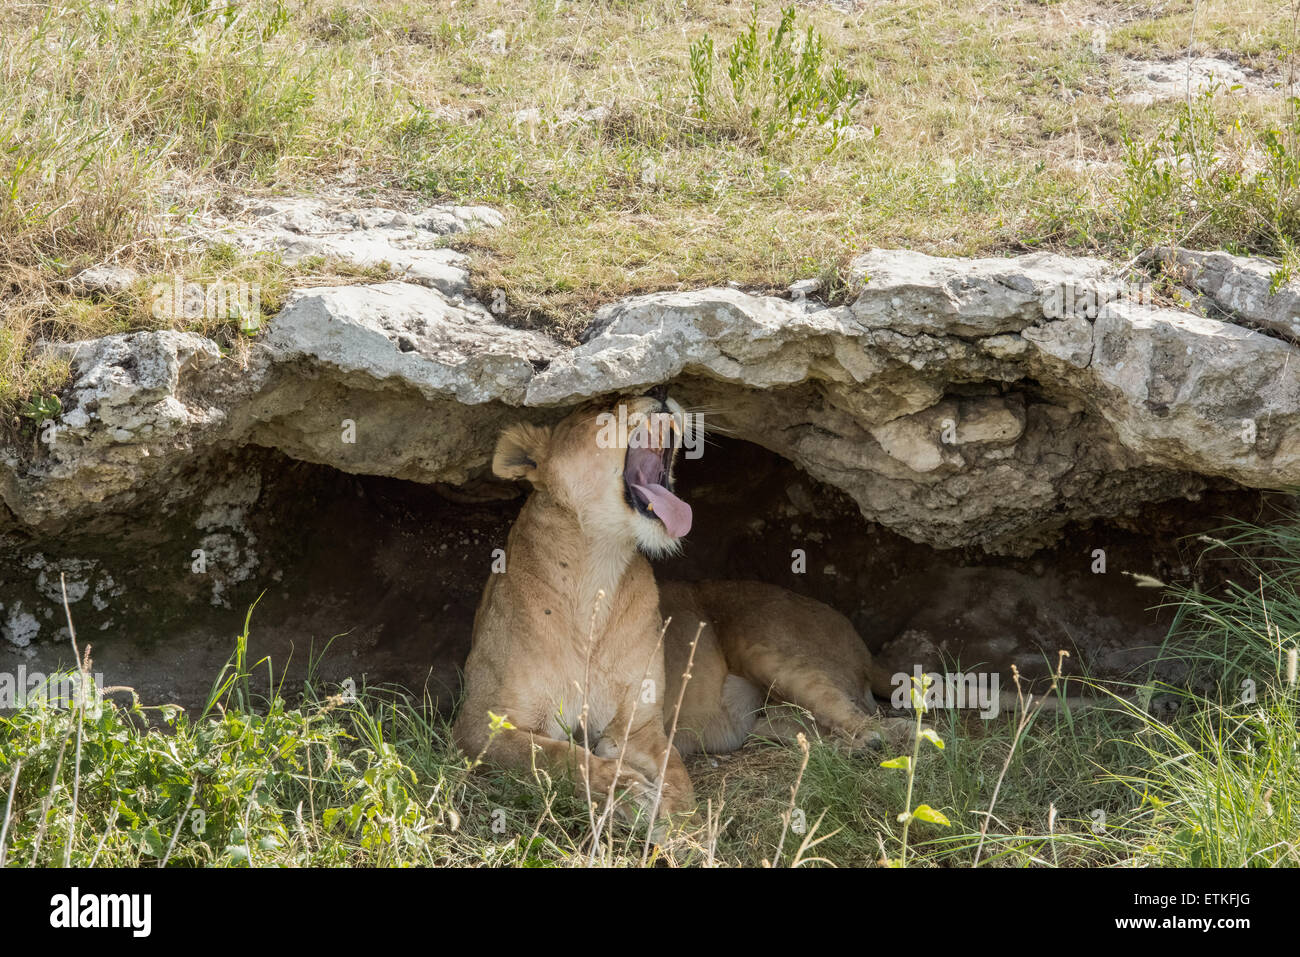 Lioness in a cave, yawning, Serengeti National Park, Tanzania Stock Photo